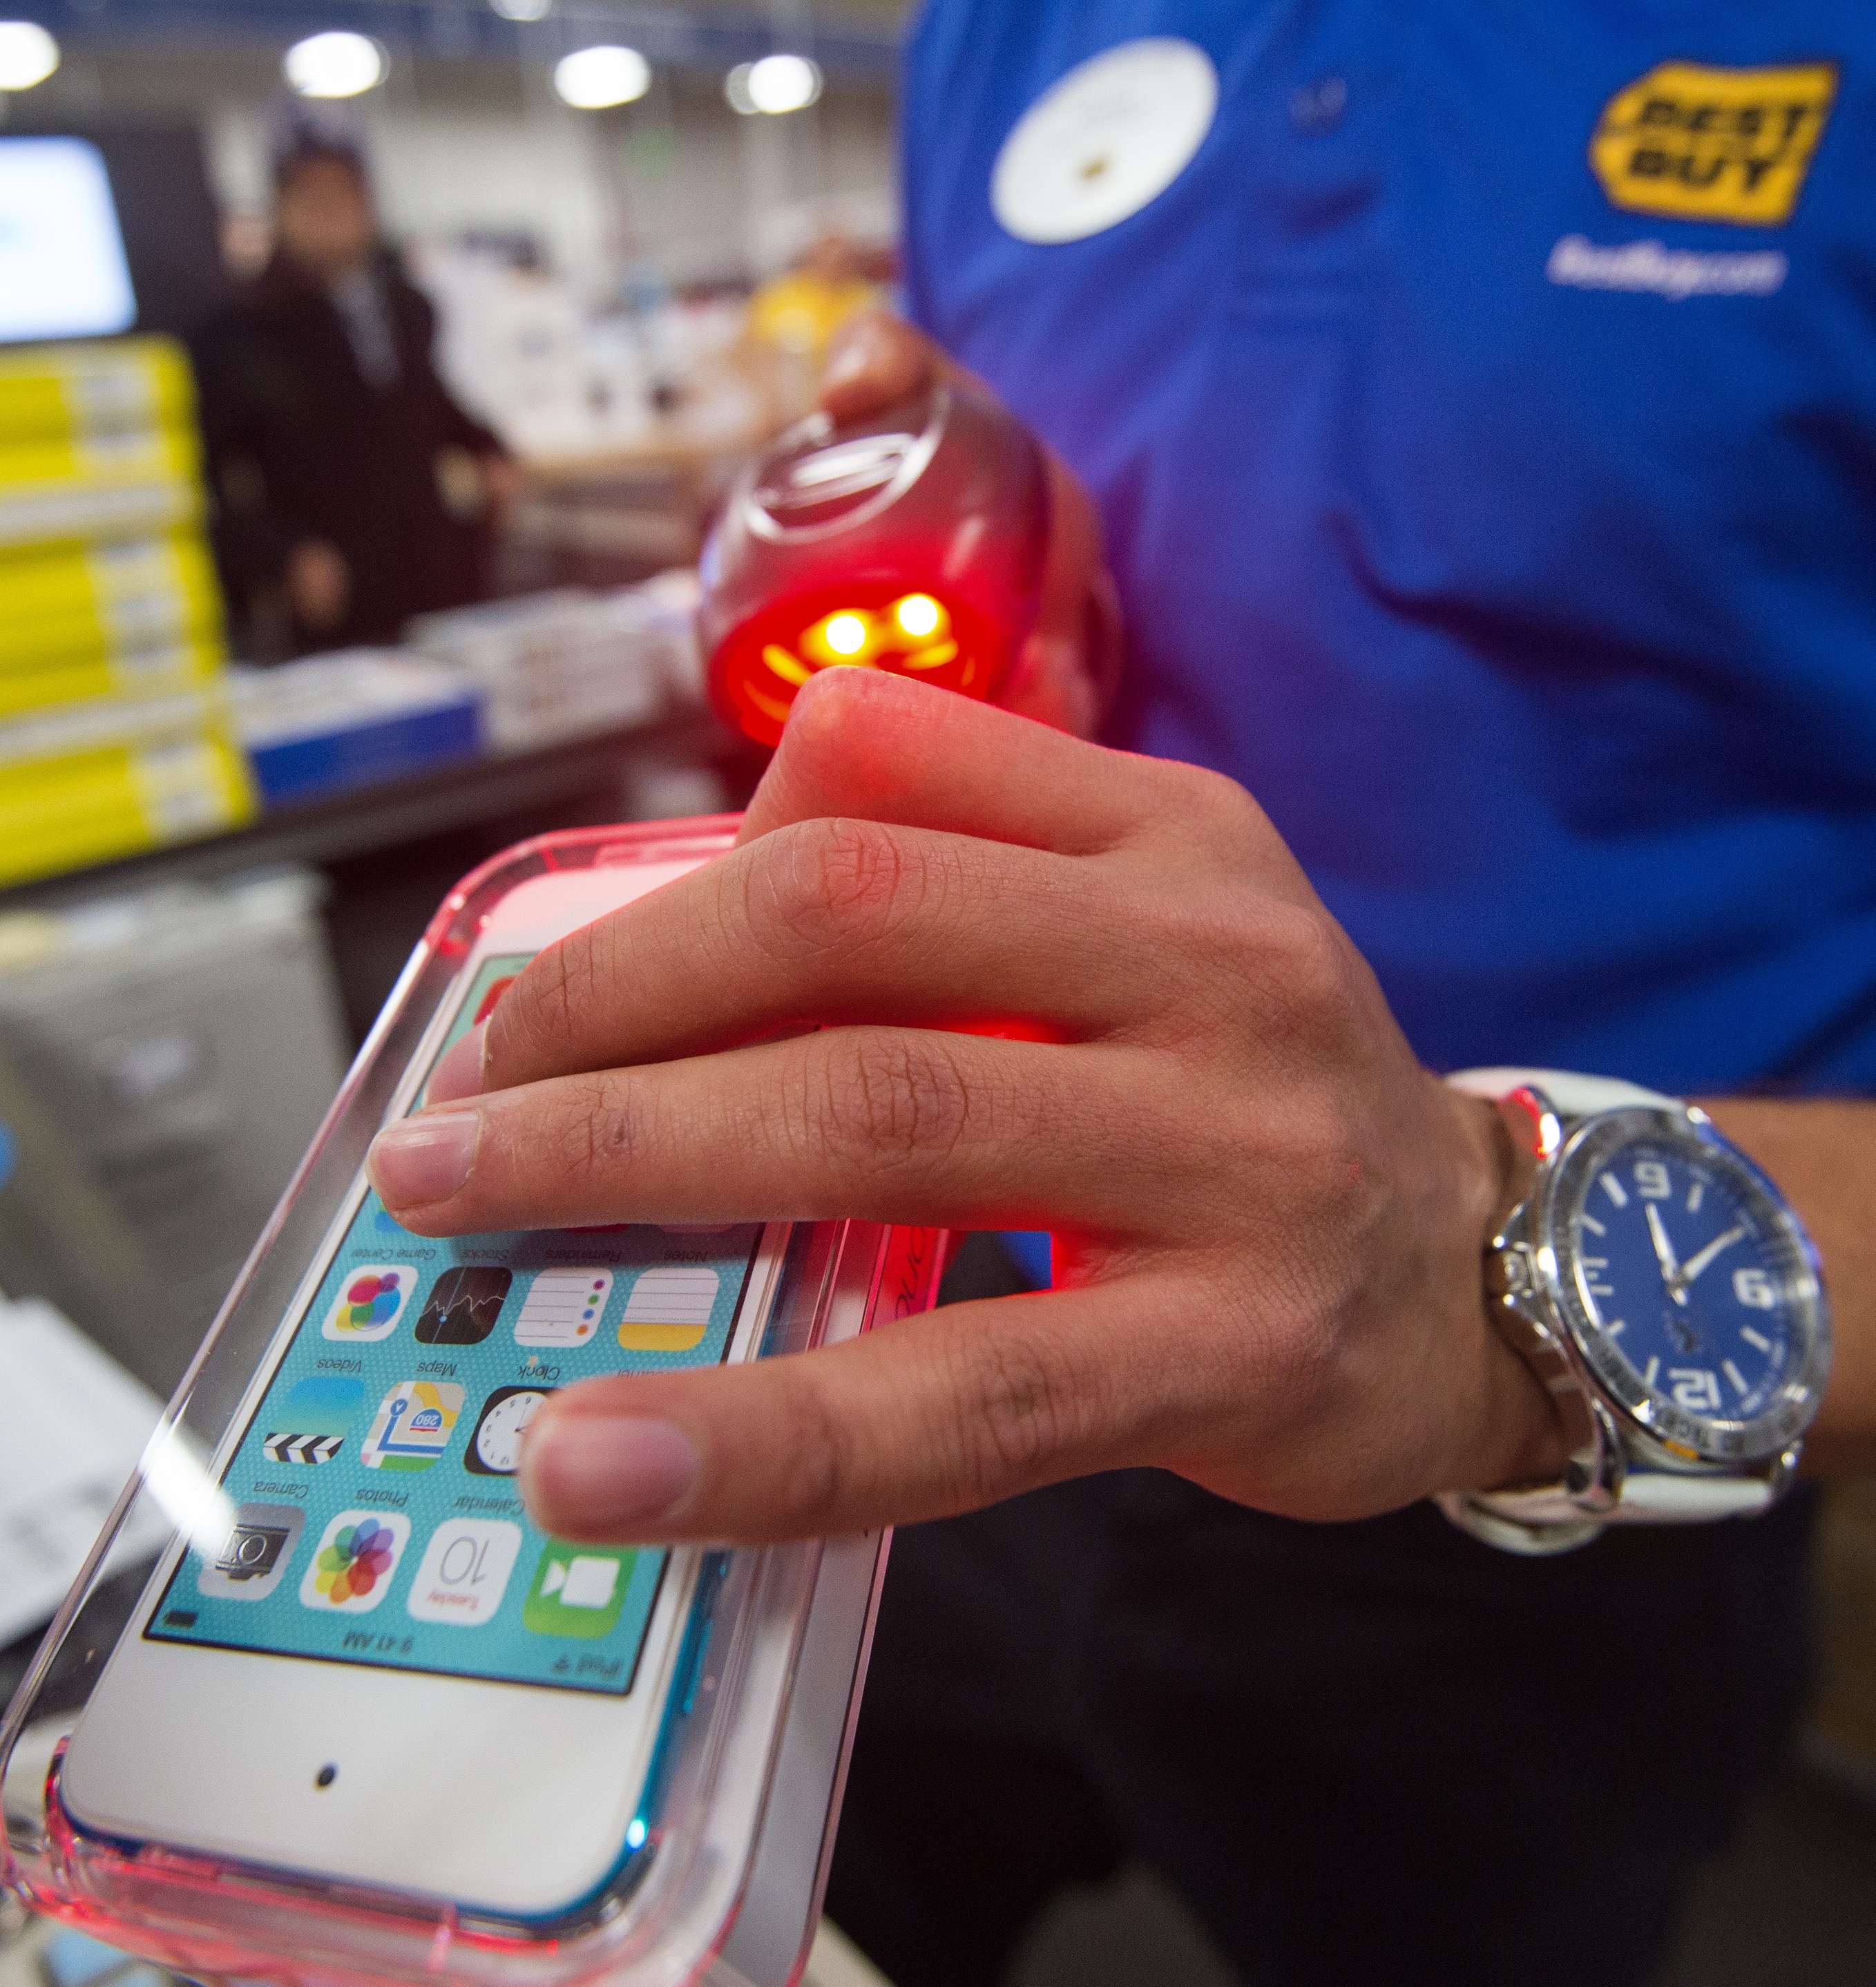 A salesperson scans an iPod Touch at the Best Buy store in Fairfax, Virginia on Nov. 27, 2014. (Paul J. Richards—AFP/Getty Images)